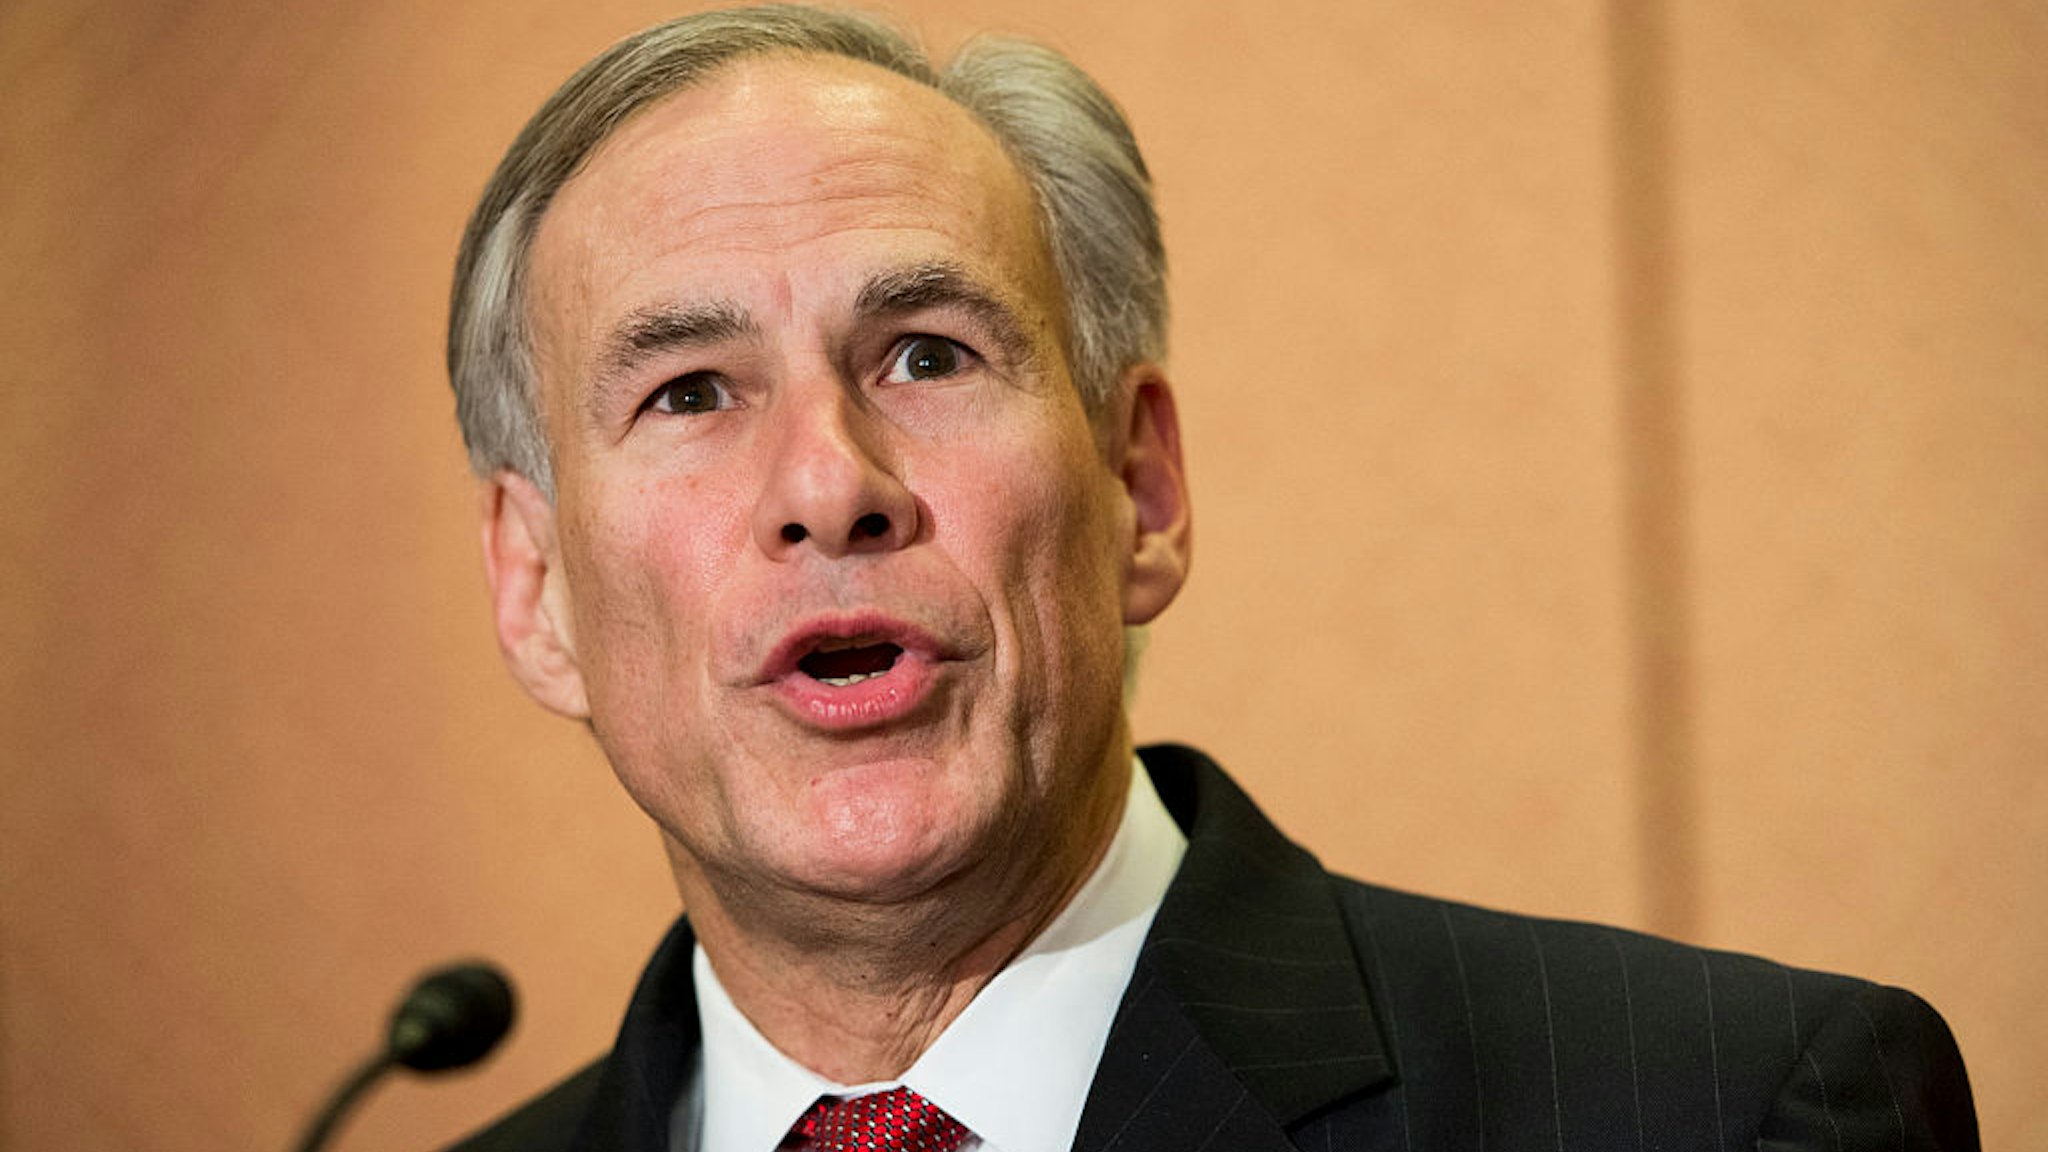 Gov. Greg Abbott, R-Texas, holds a news conference with Sen. Ted Cruz, R-Texas, (not pictured) in the U.S. Capitol to discuss Syrian refugee legislation on Tuesday, Dec. 8, 2015.